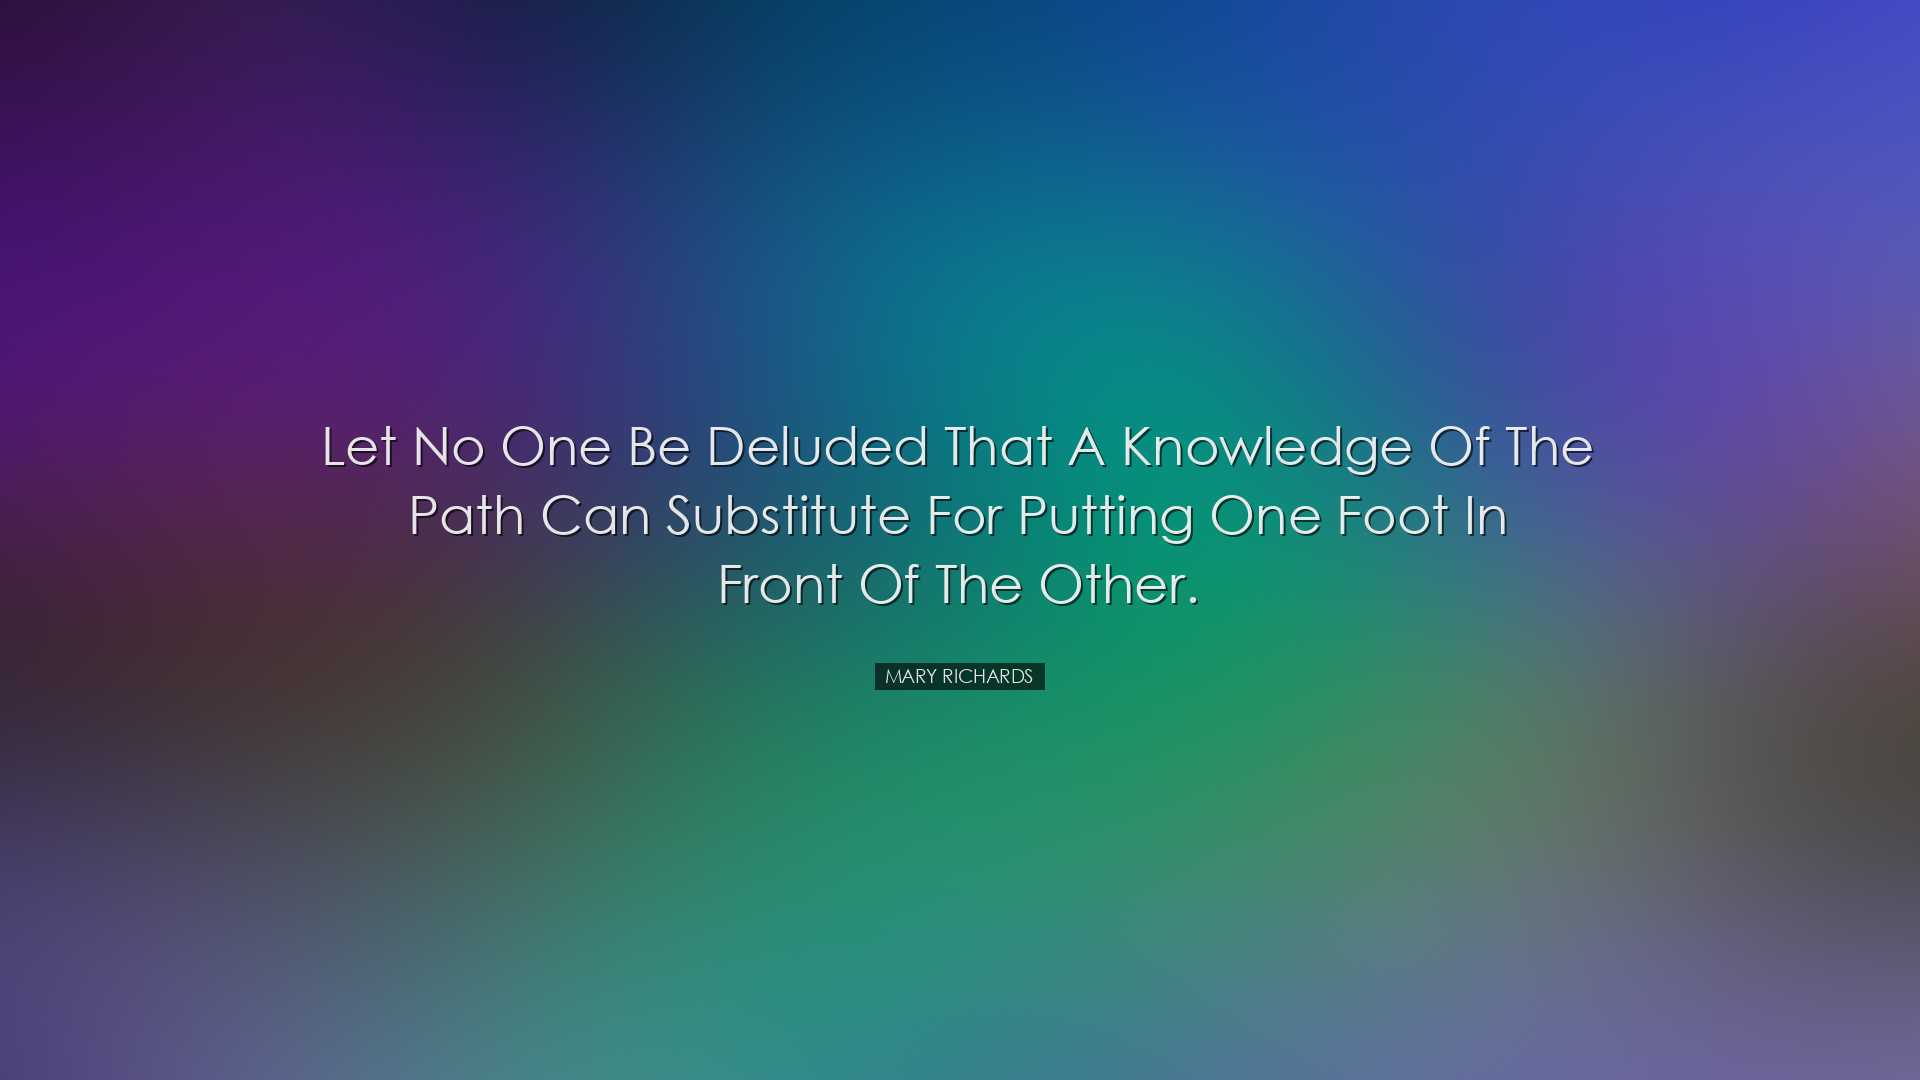 Let no one be deluded that a knowledge of the path can substitute